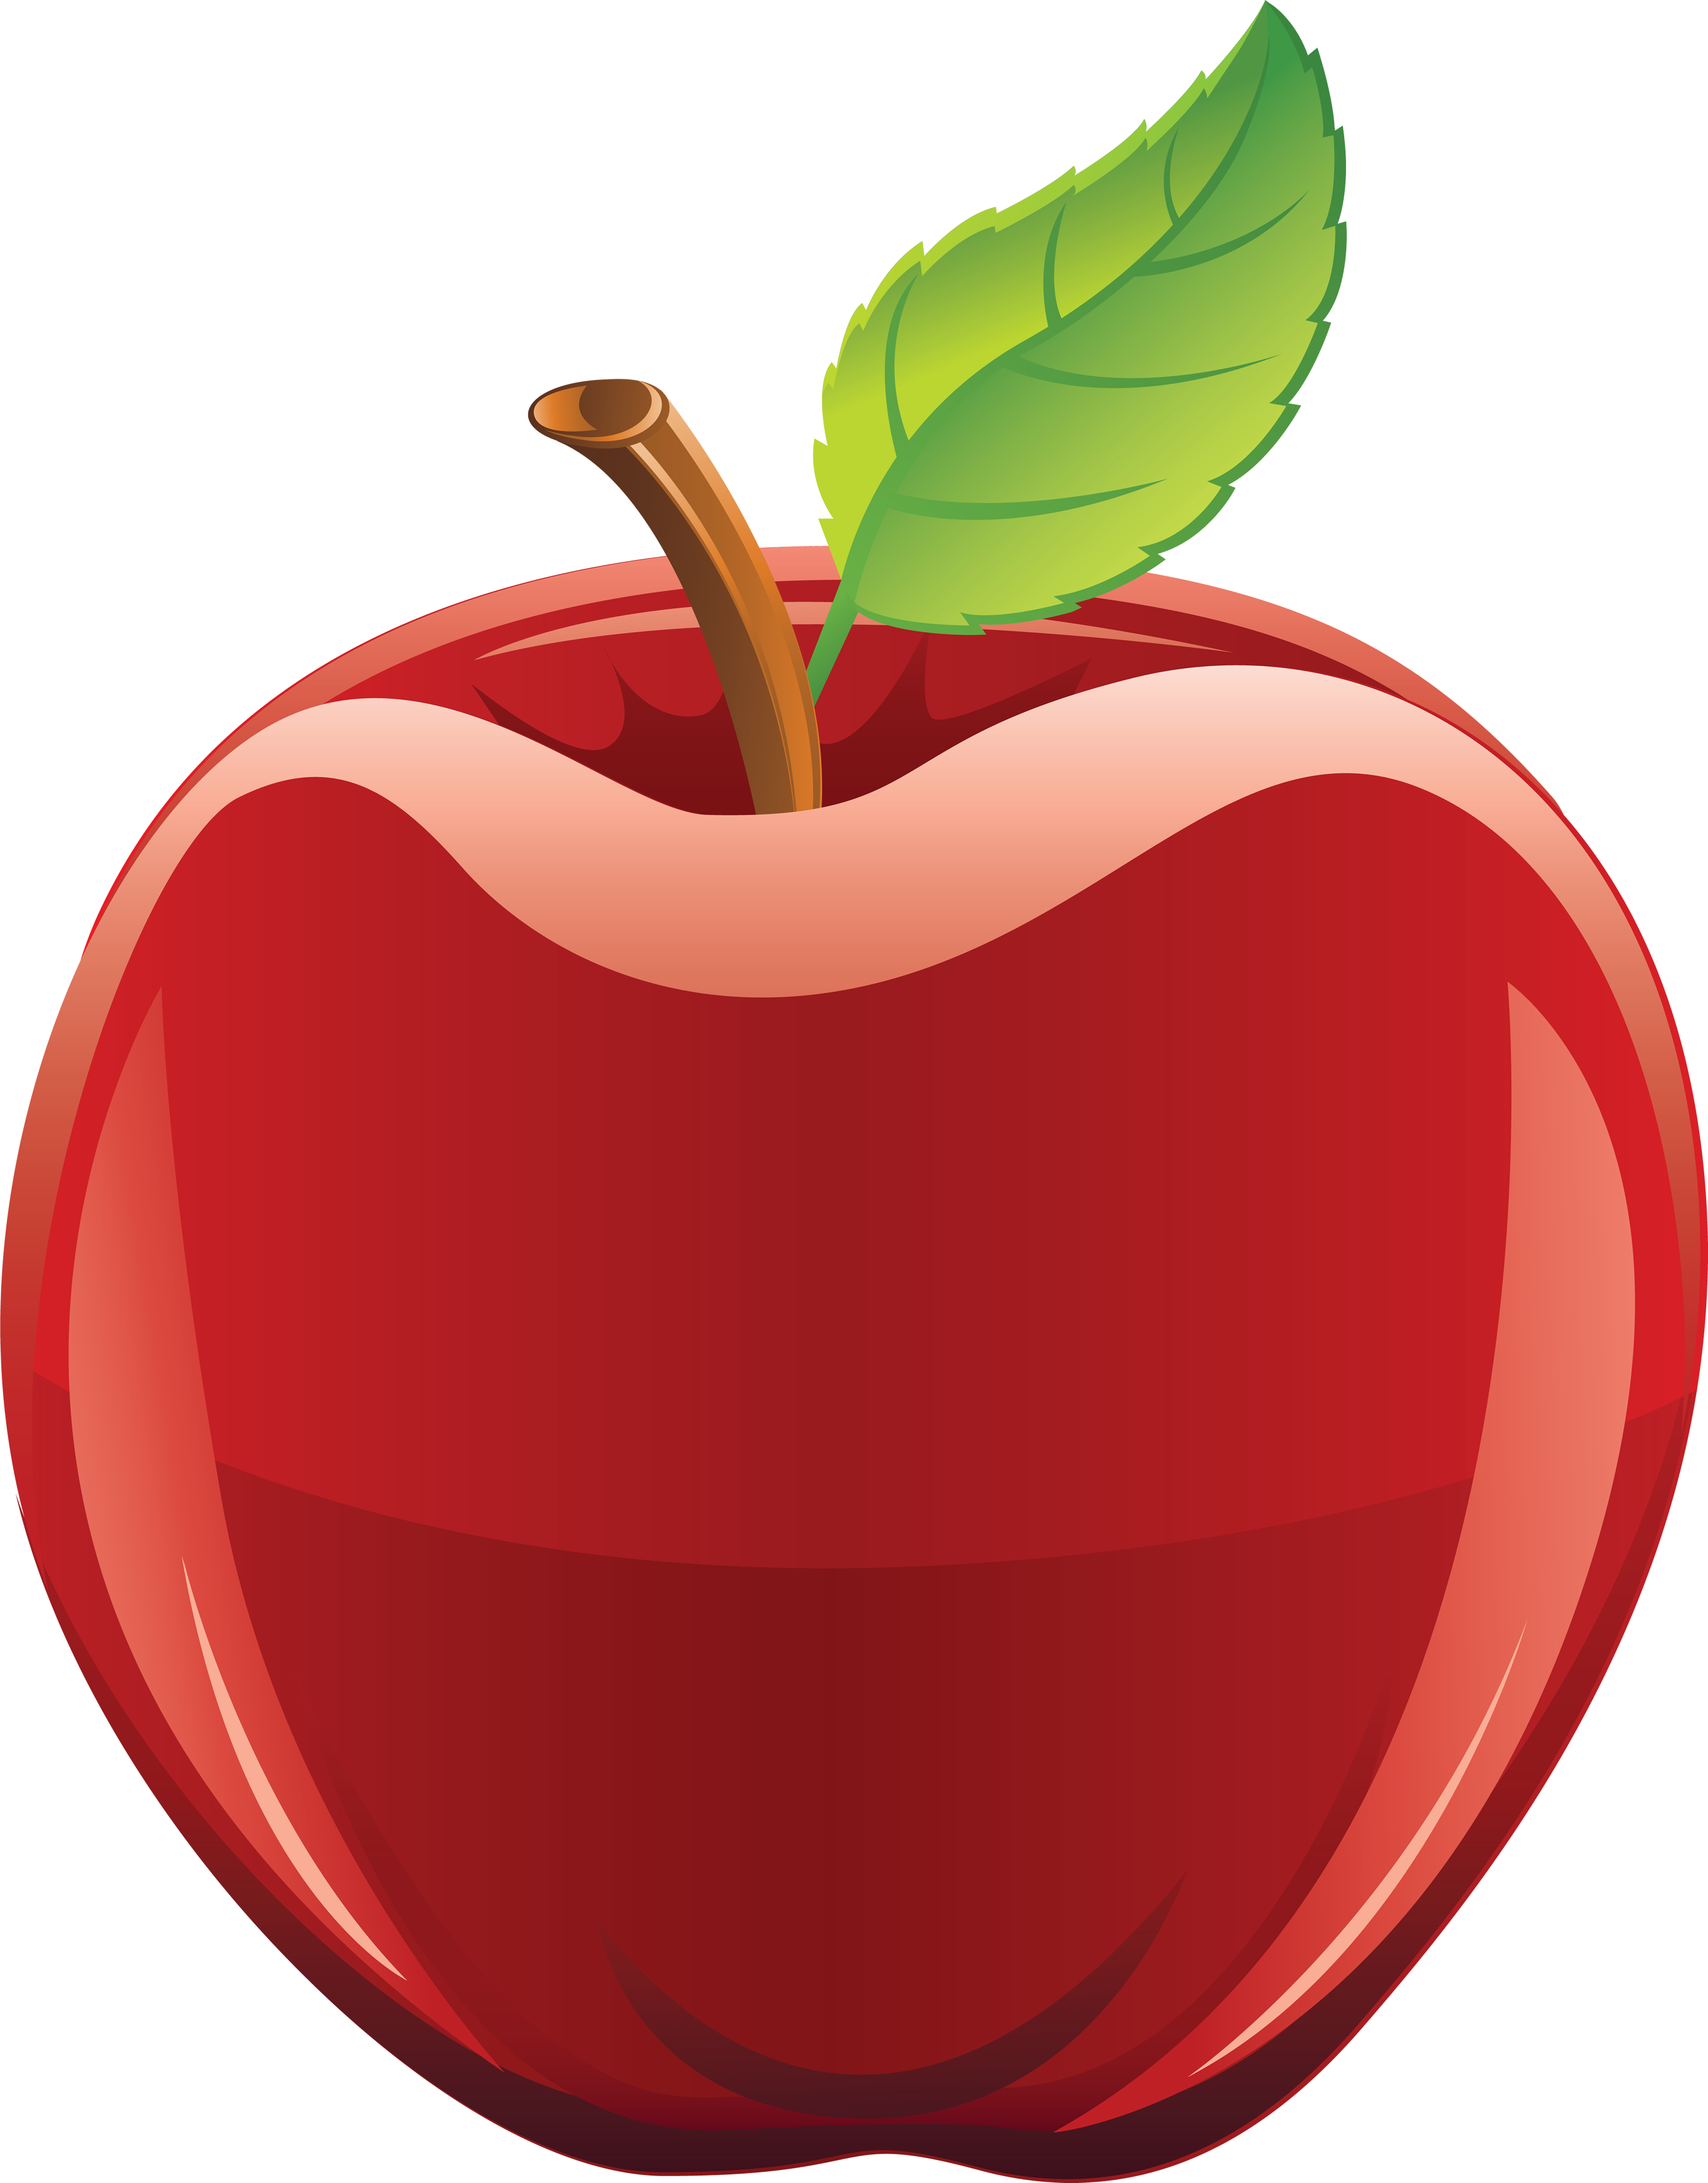 apple clipart png - photo #31